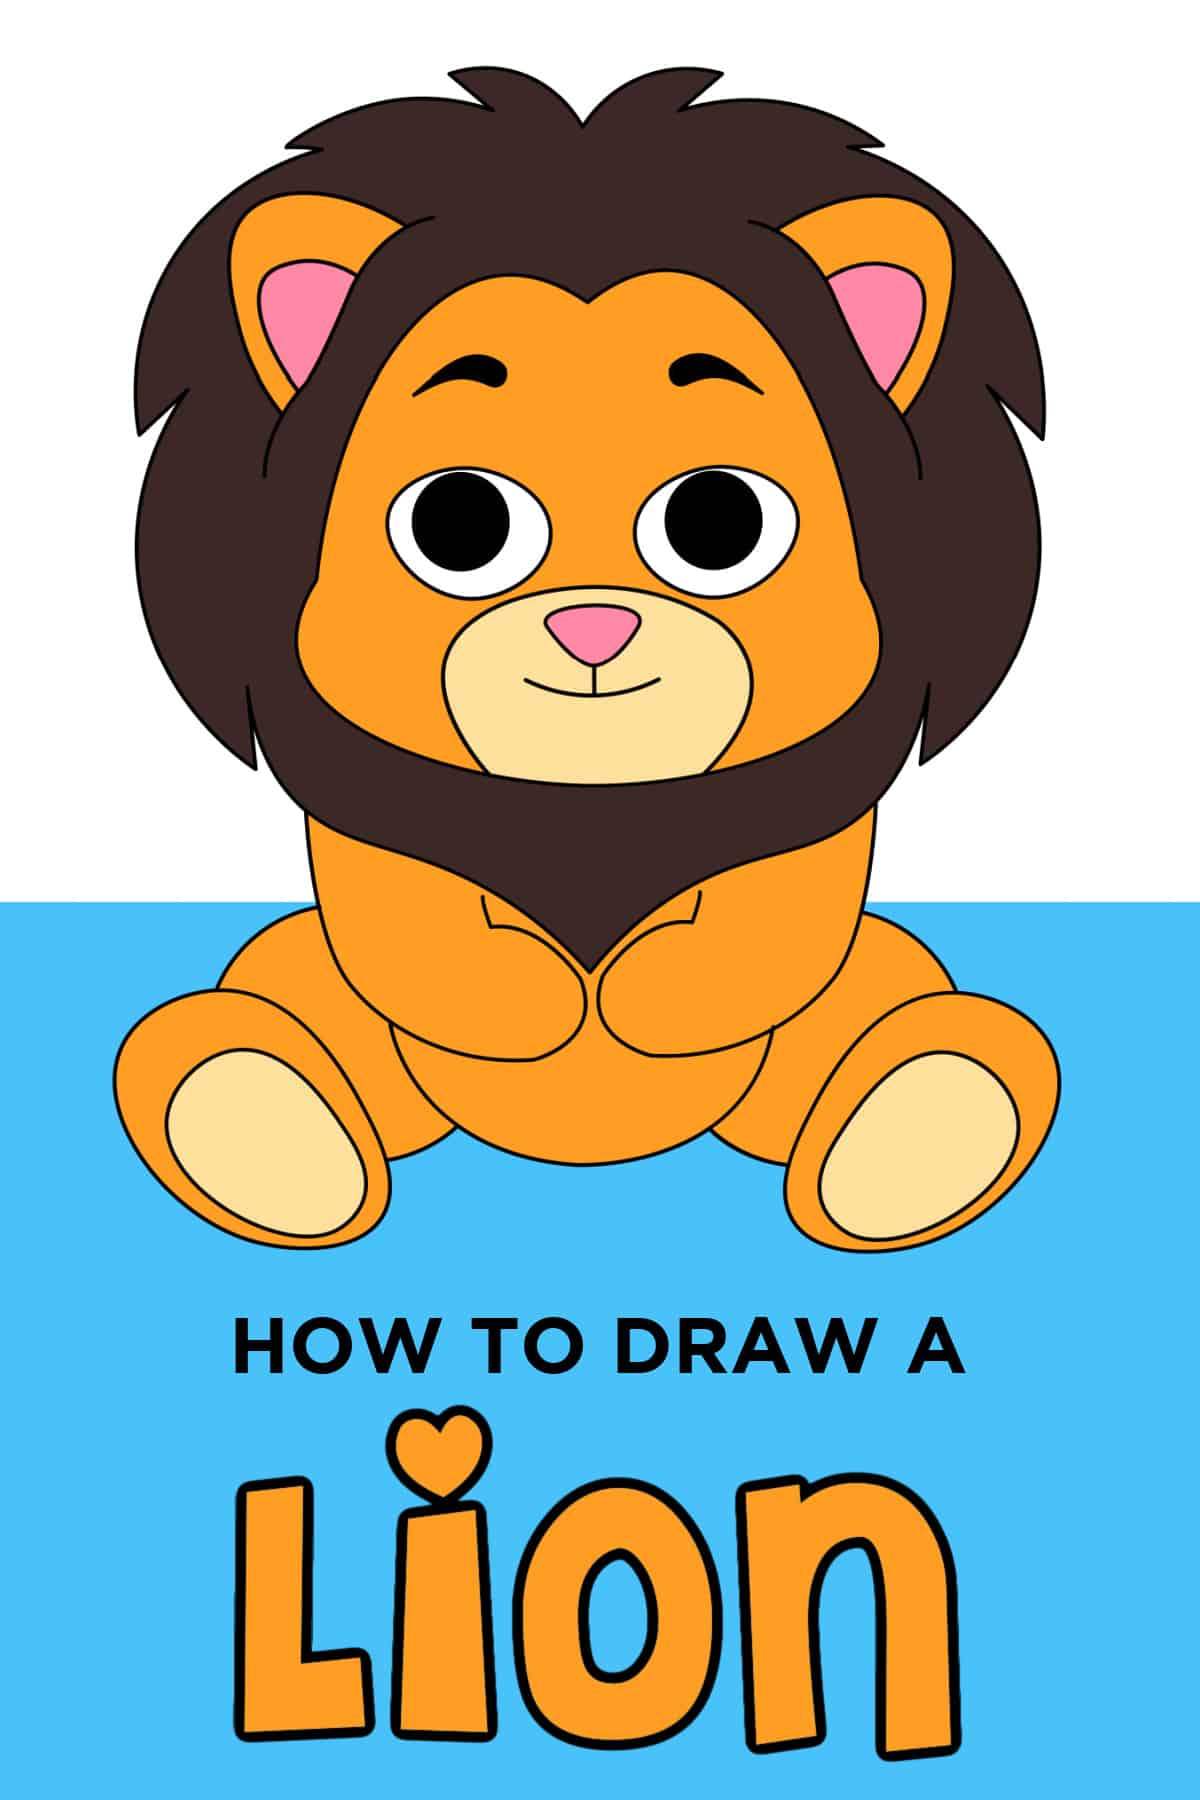 How to Draw a Lion's Face (Big Cats) Step by Step | DrawingTutorials101.com